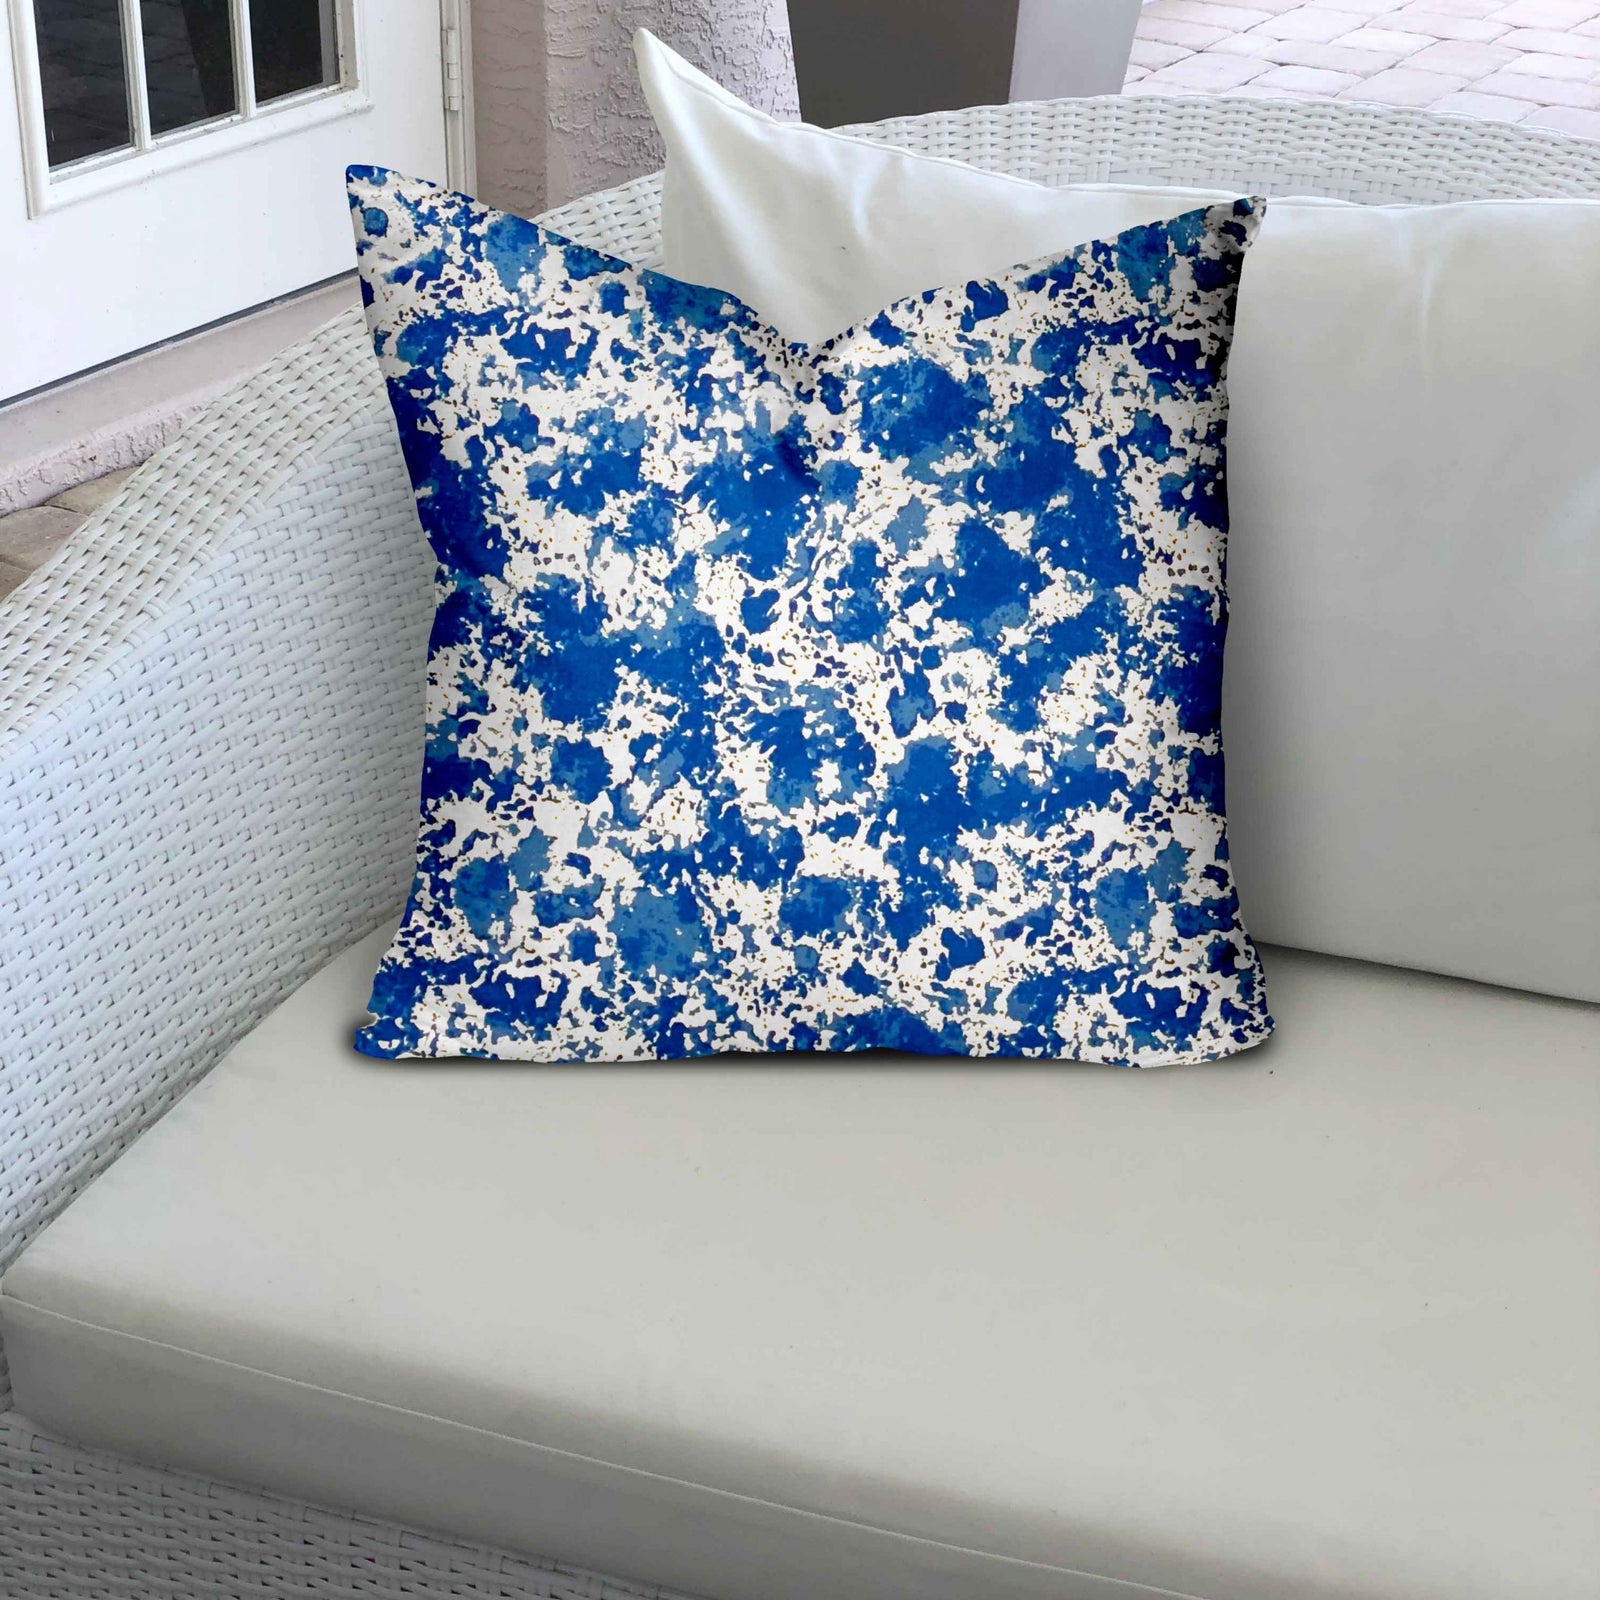 24" X 24" Blue And White Enveloped Coastal Throw Indoor Outdoor Pillow Cover